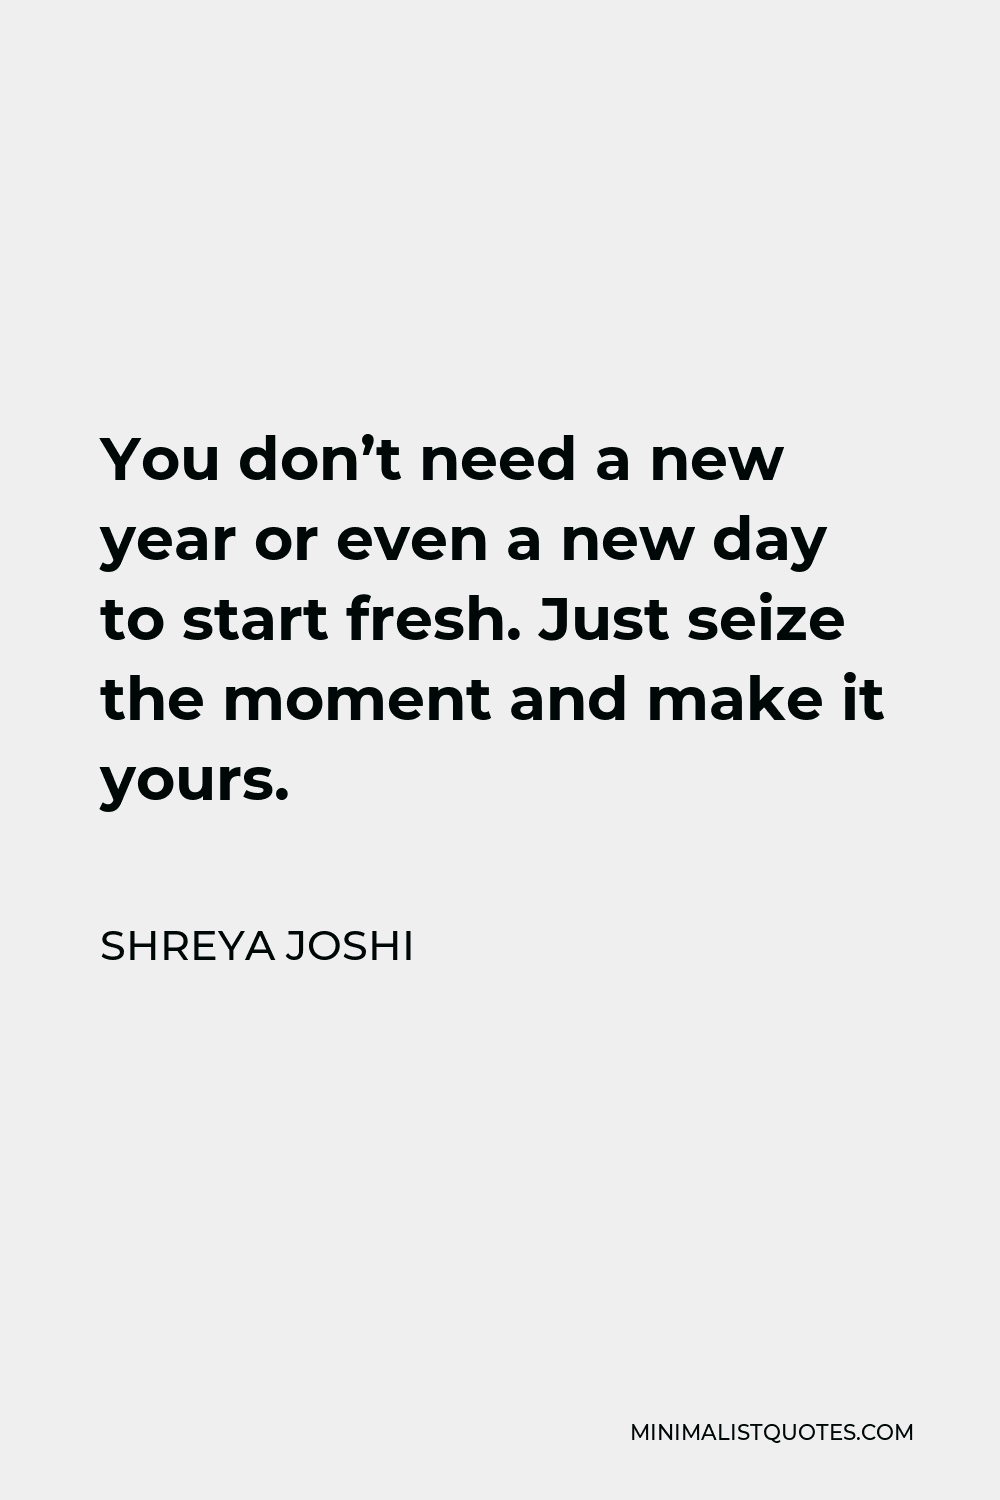 Shreya Joshi Quote - You don’t need a new year or even a new day to start fresh. Just seize the moment and make it yours.